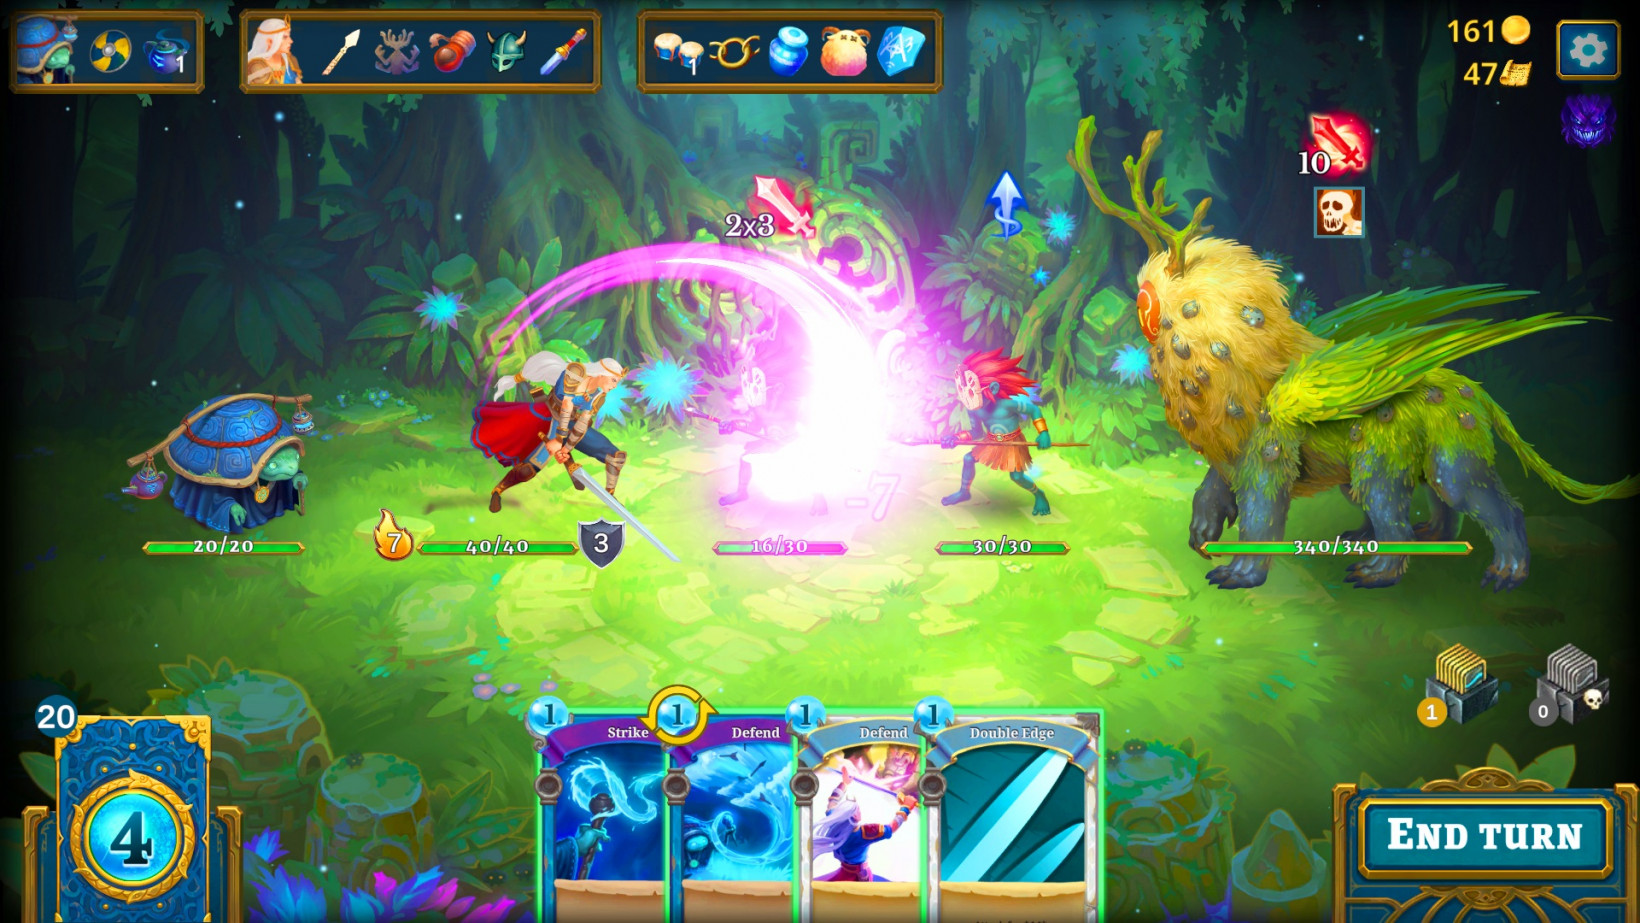 A screenshot from the game Roguebook